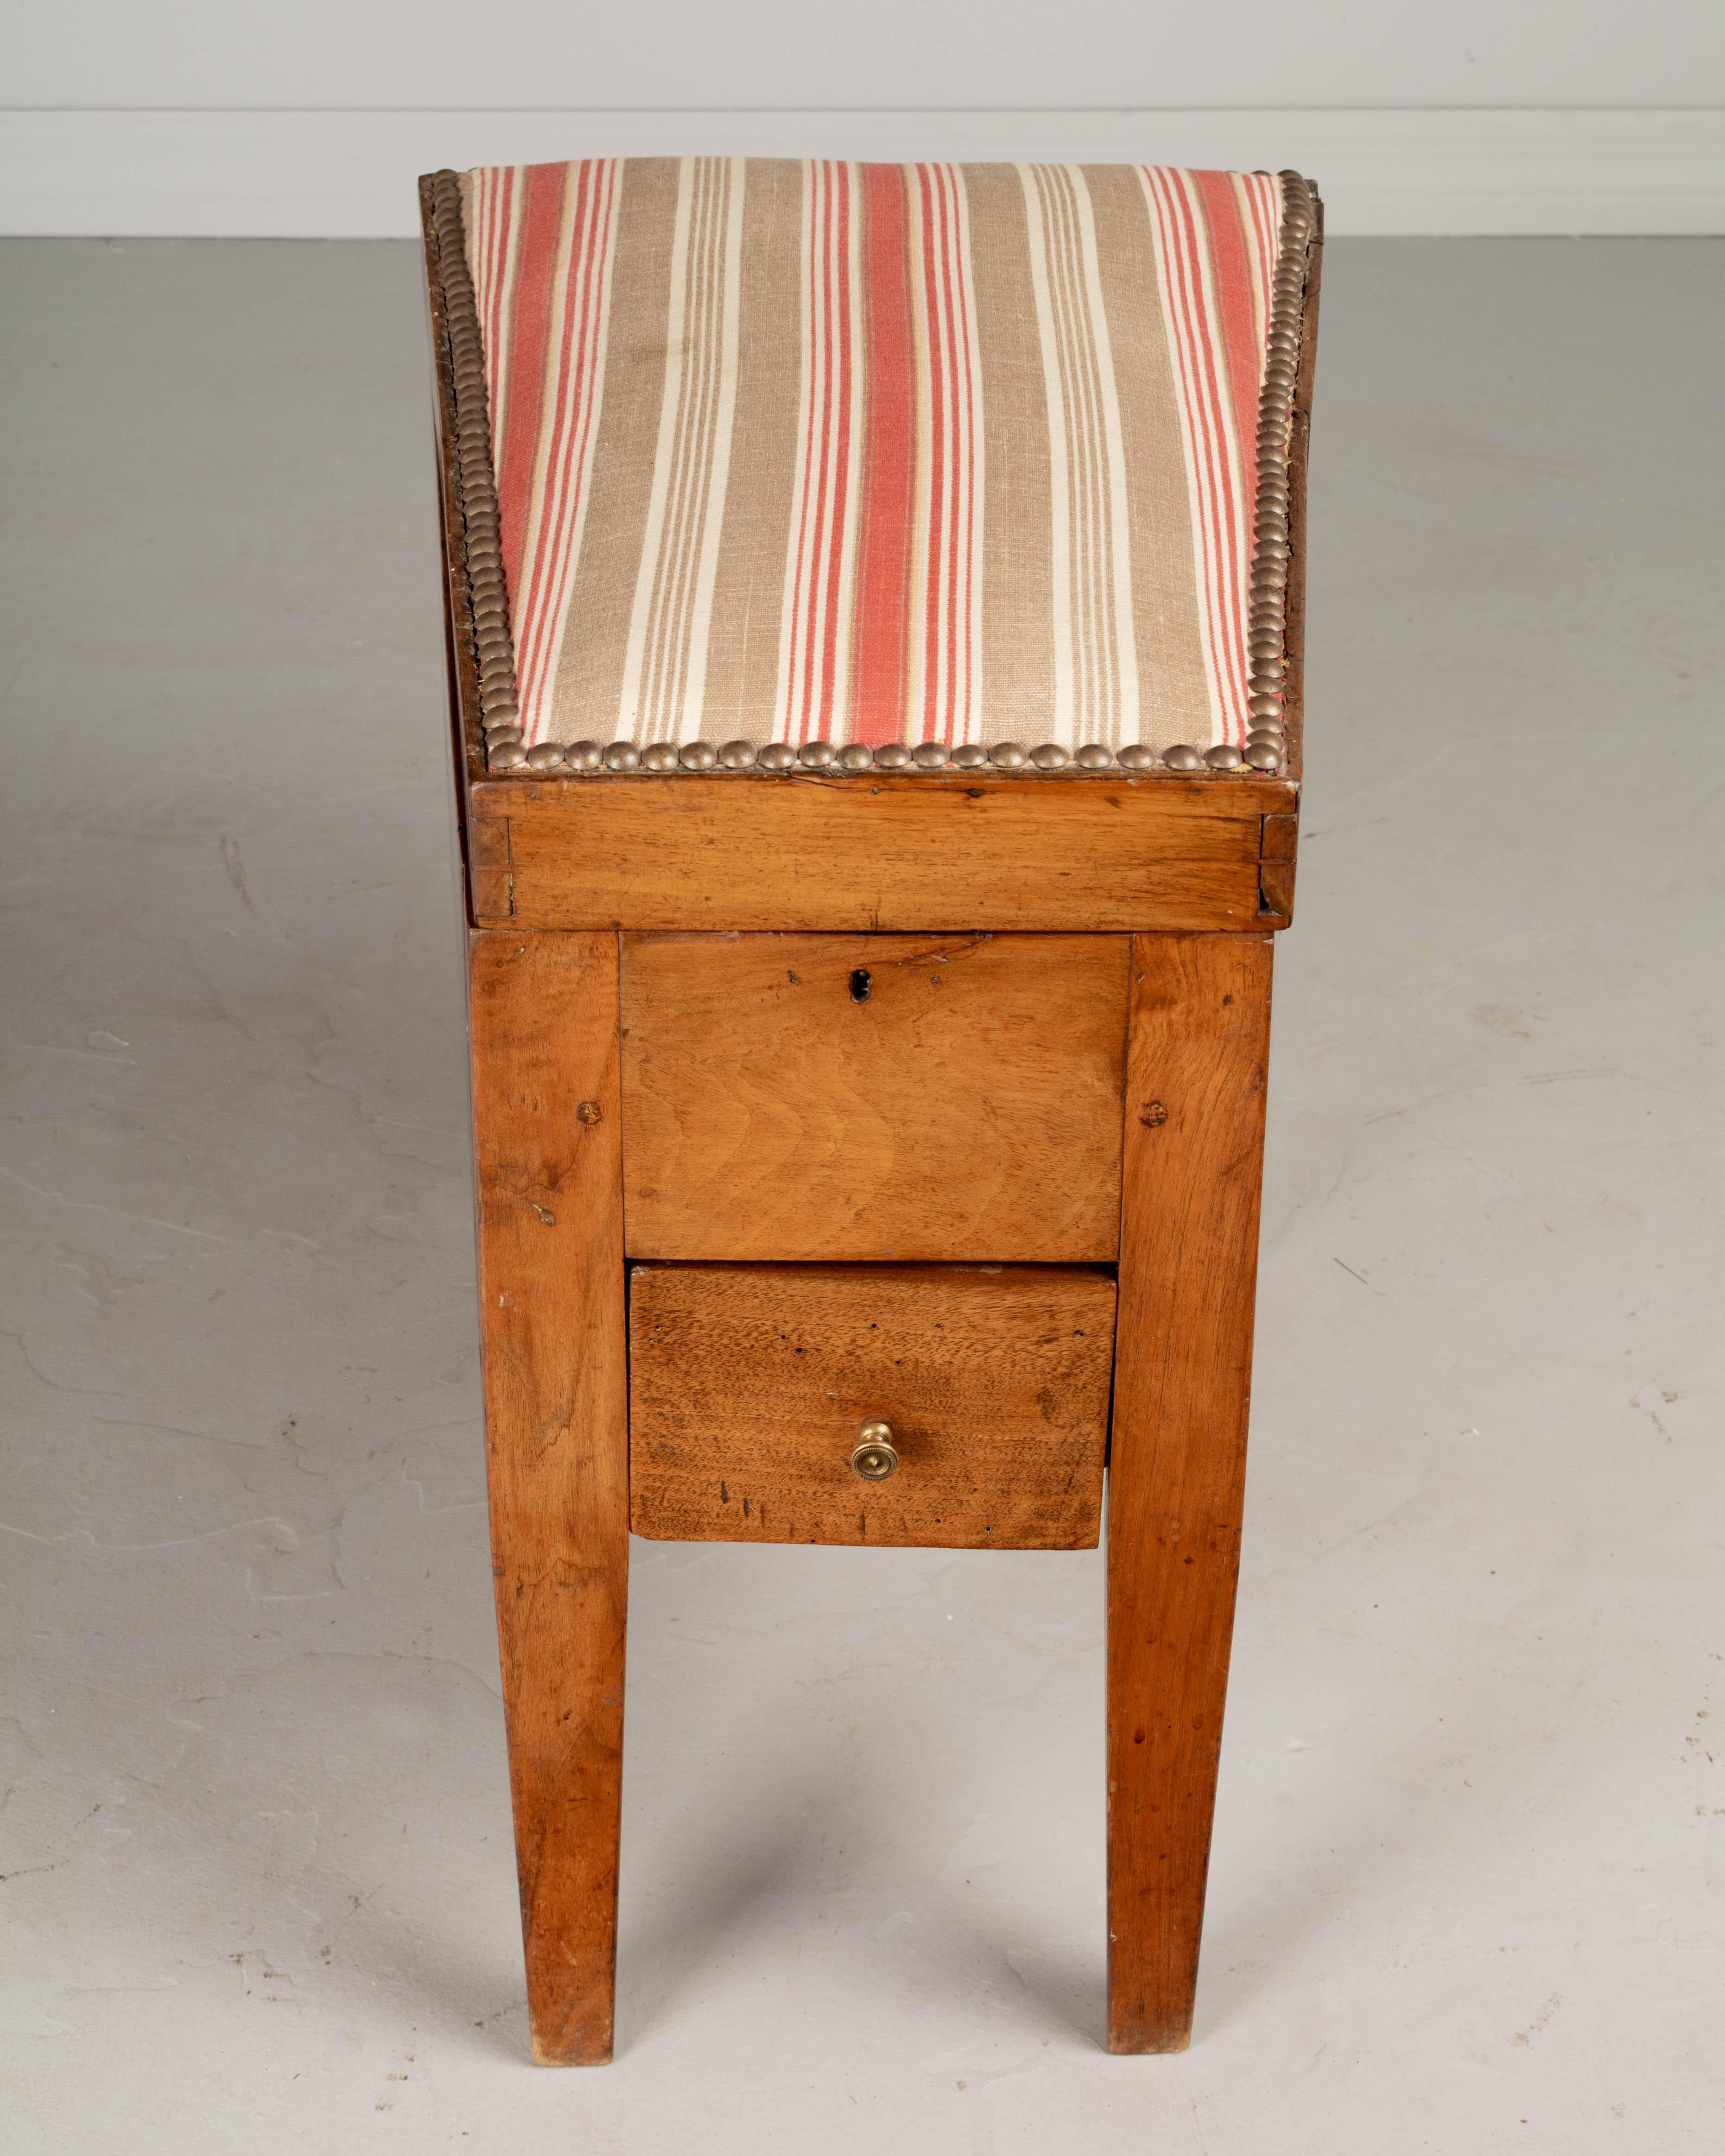 19th Century French Shoe Shine Stool In Good Condition For Sale In Winter Park, FL